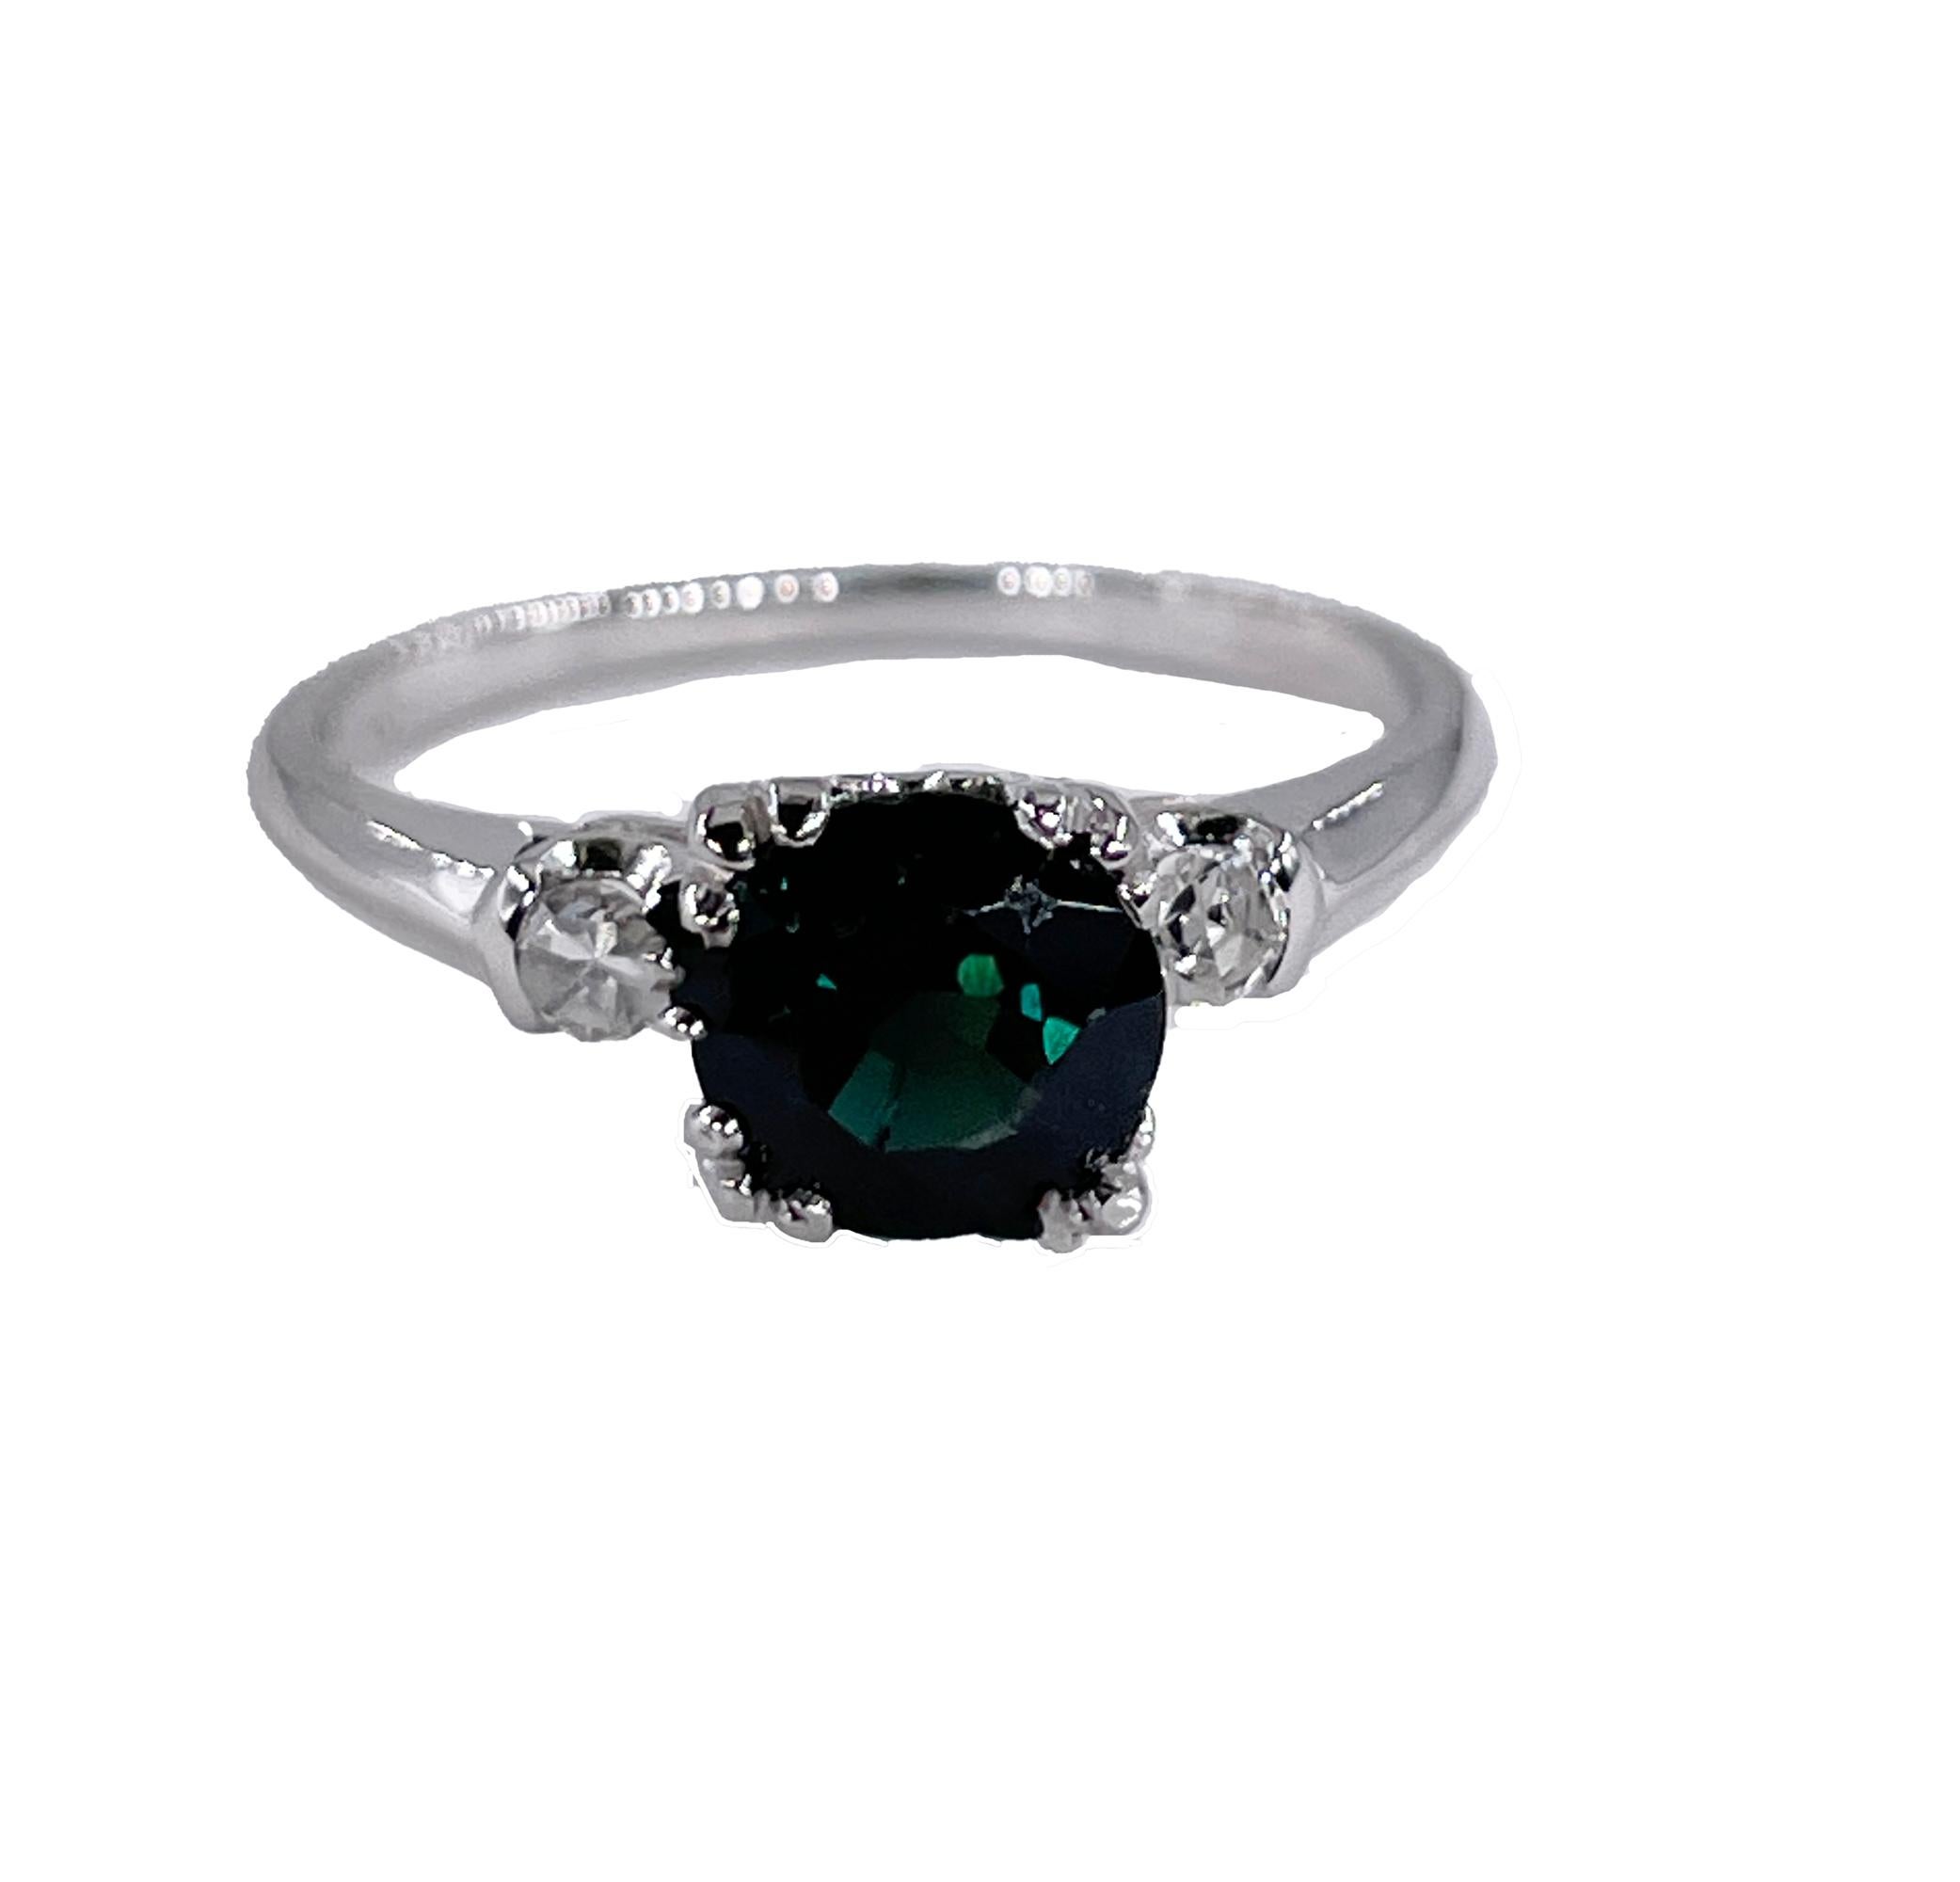 Offered for sale is a truly superb vintage Art Deco era ring (circa 1930s) crafted beautifully in 18k white gold. This striking and sparkling Jewel is adorned with exceptionally rare color sapphire - GREEN . The enduring and alluring Sapphire forms